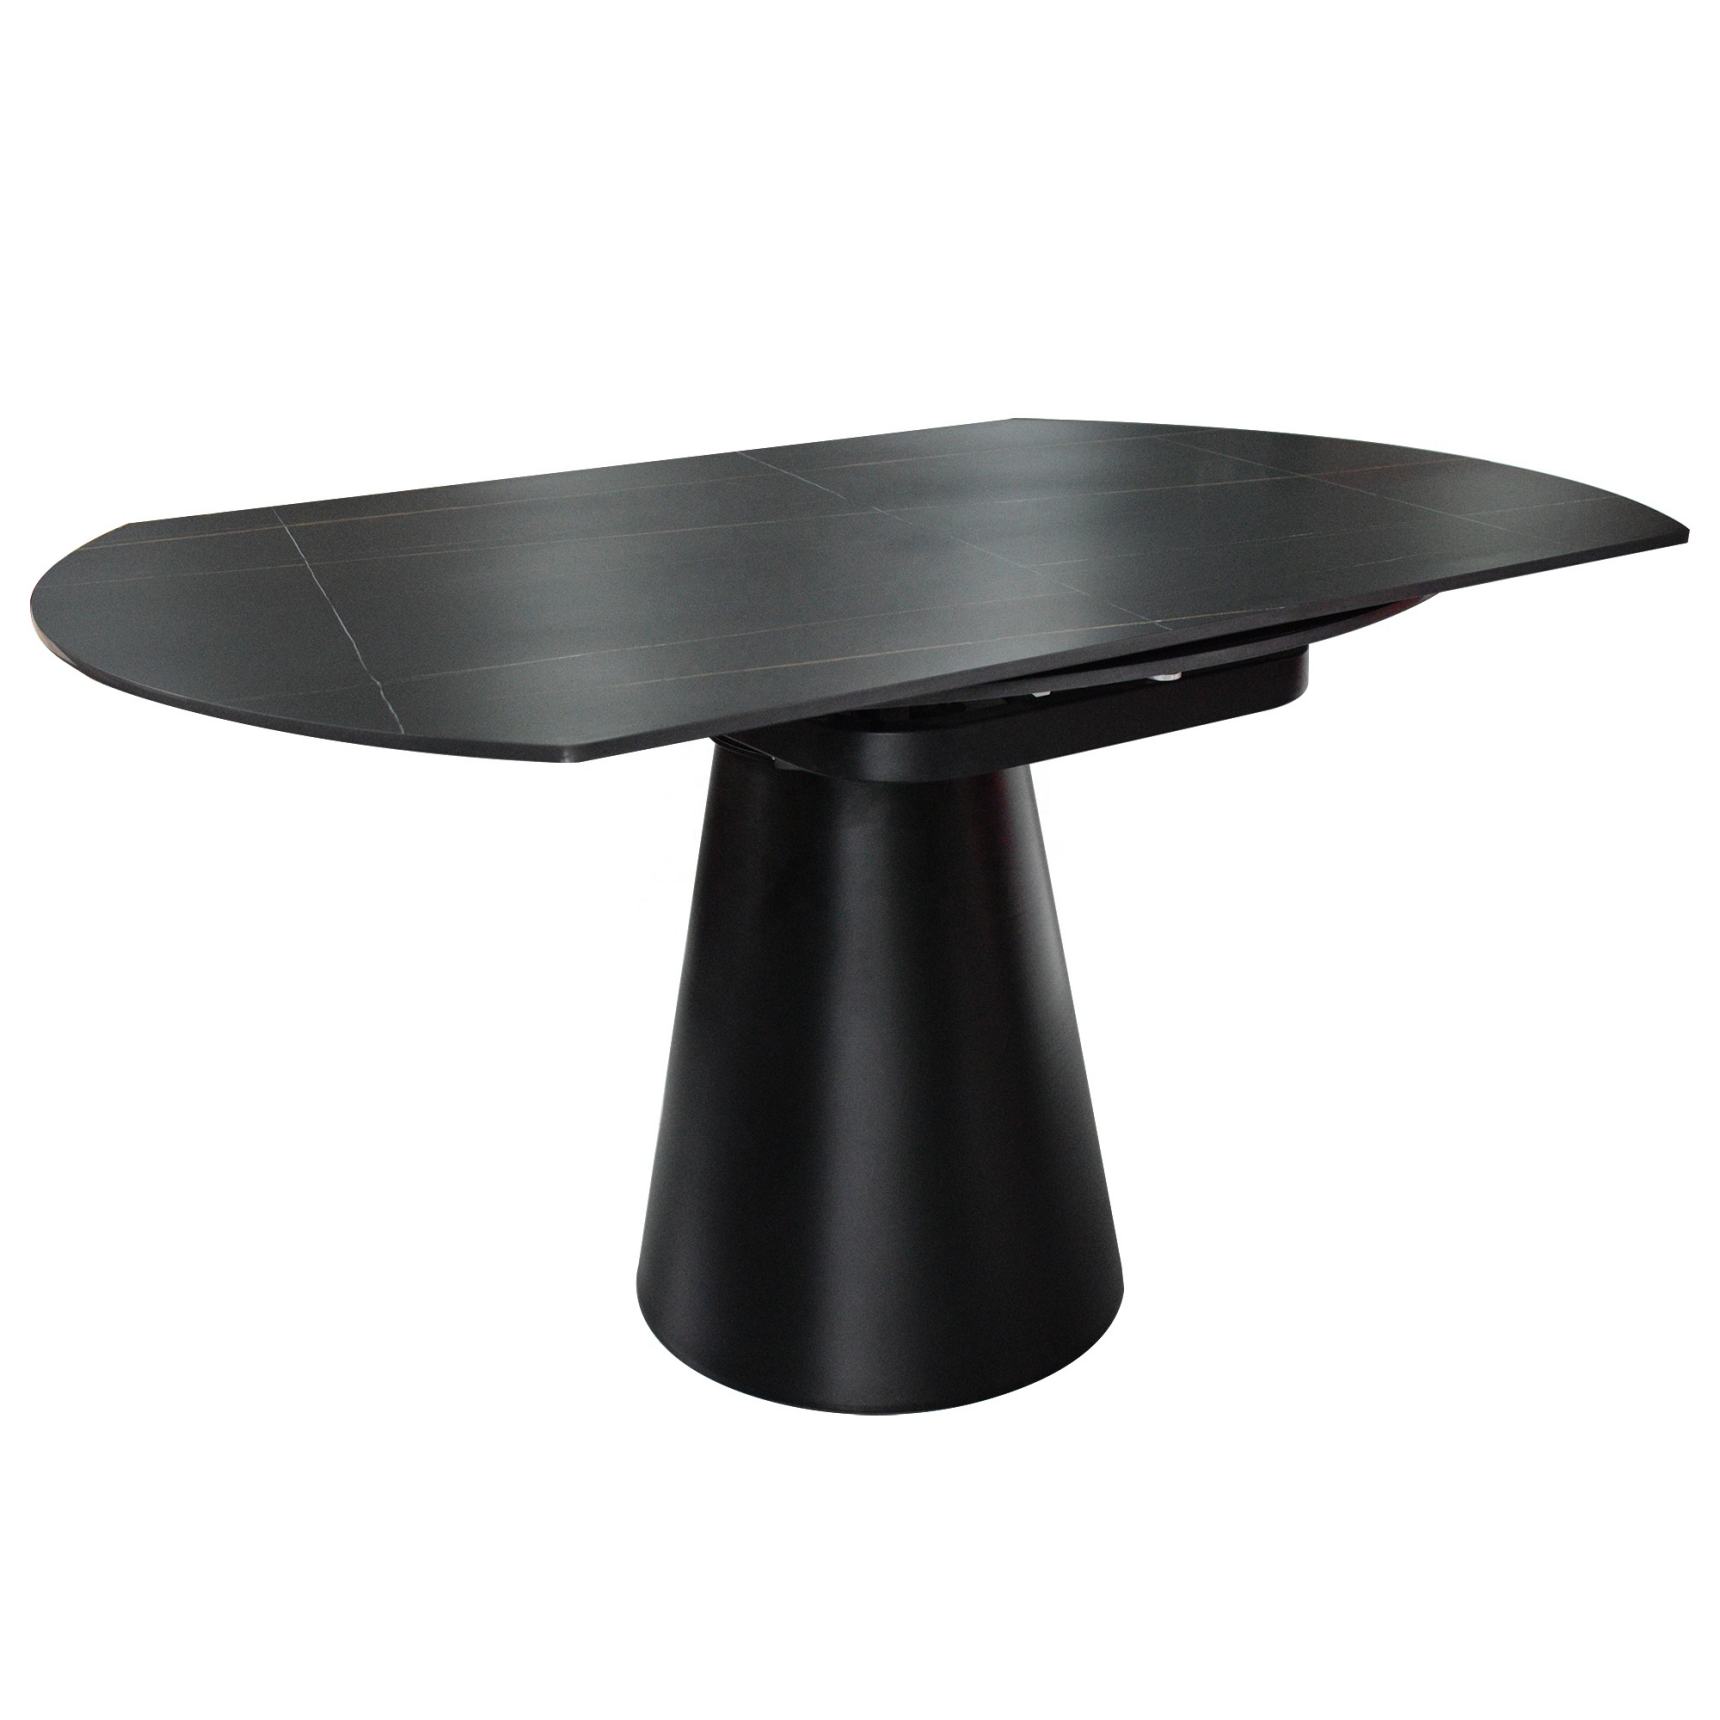 Extendable table base adjustable dining table base for dining room